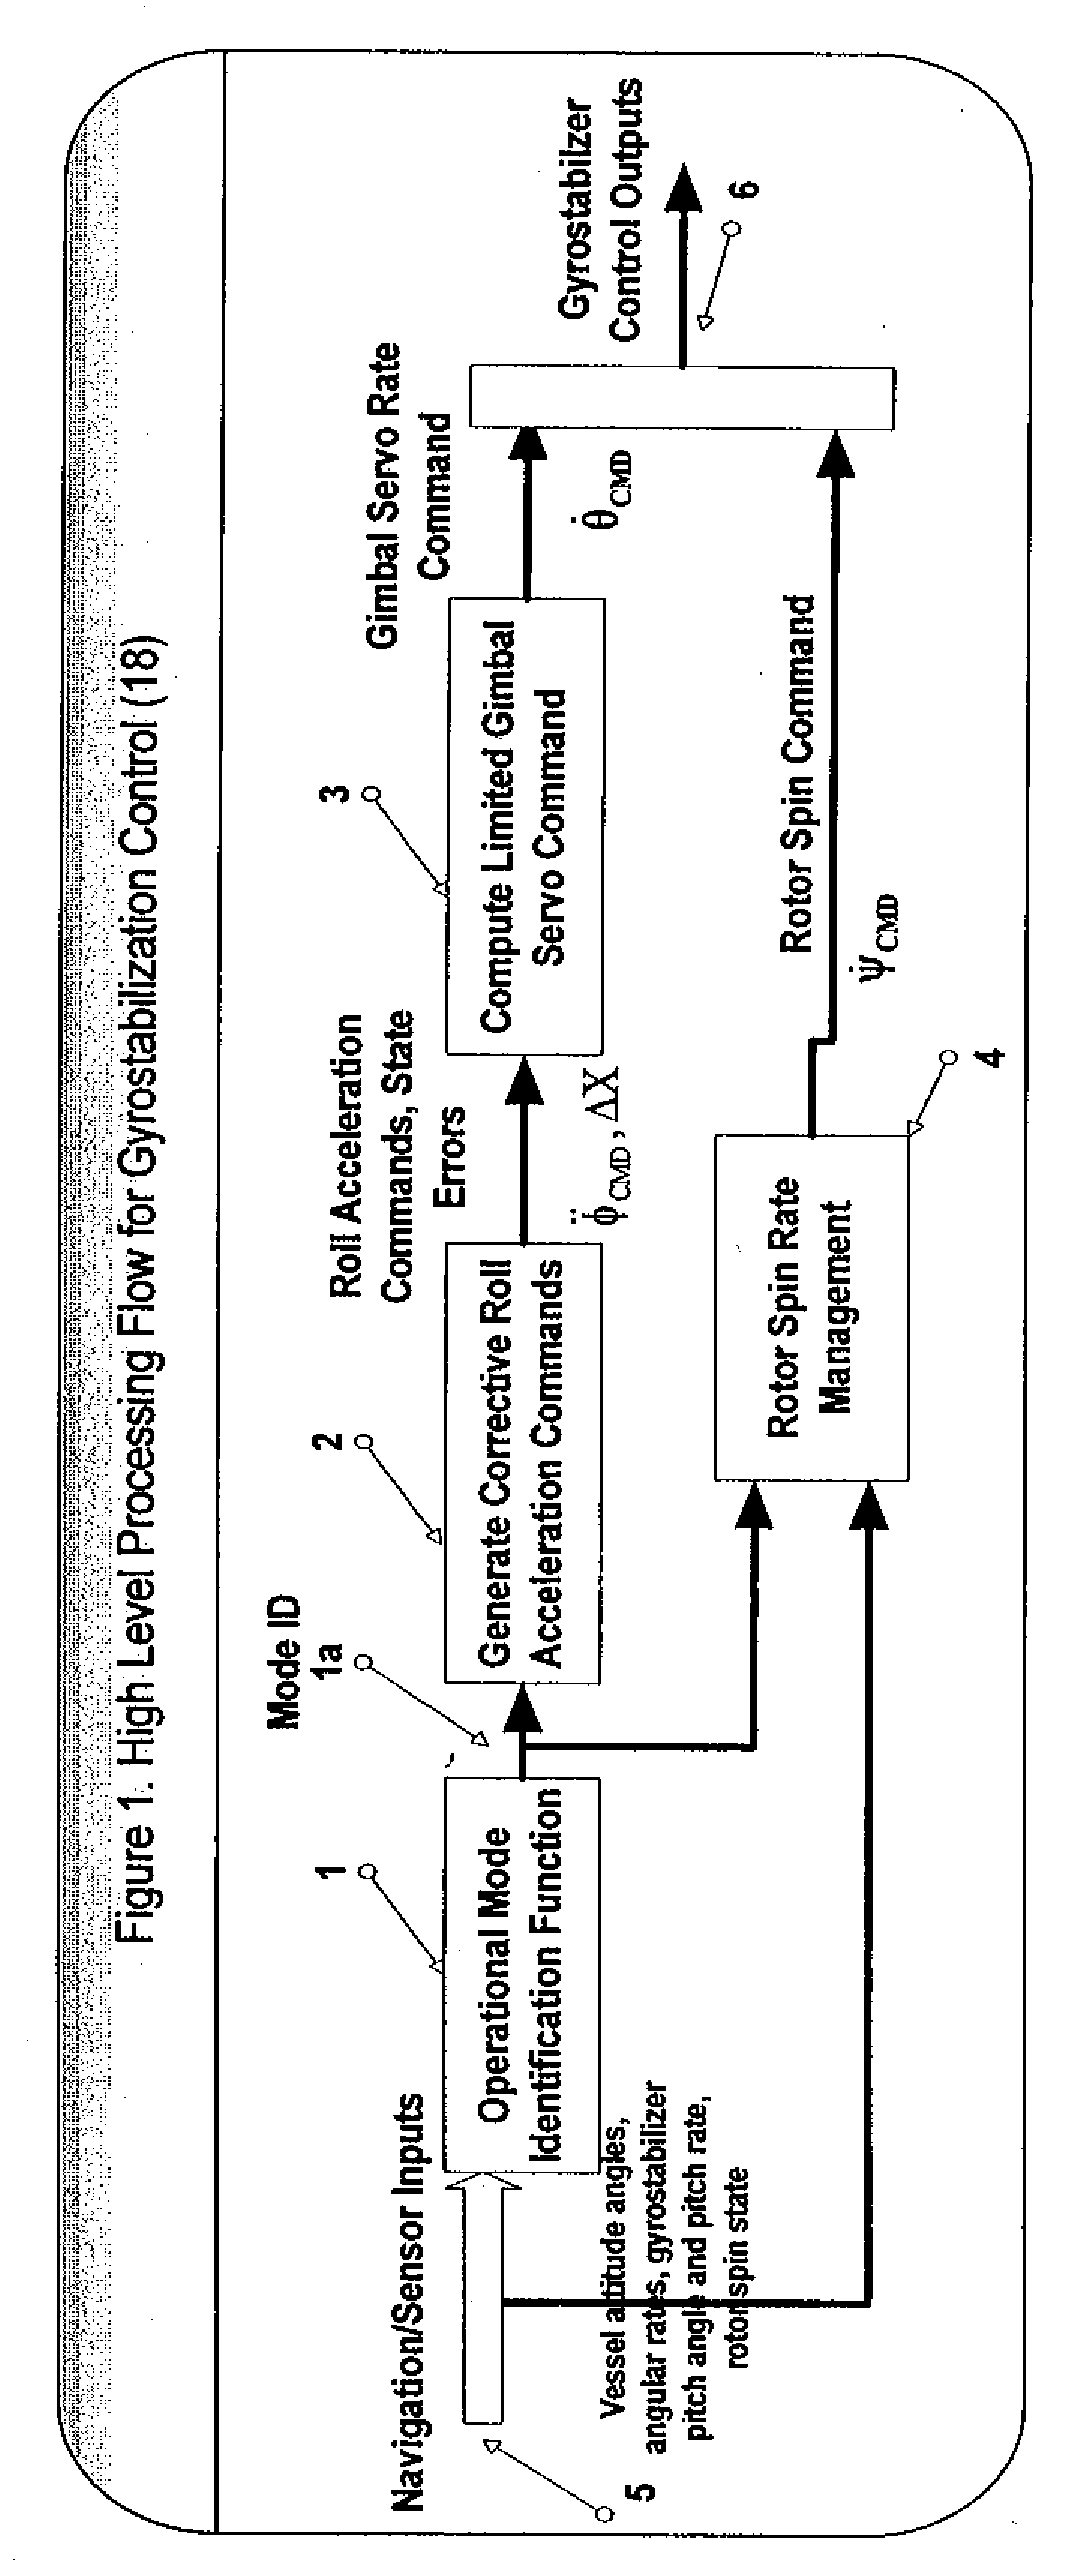 Control system for a vessel with a gyrostabilization system